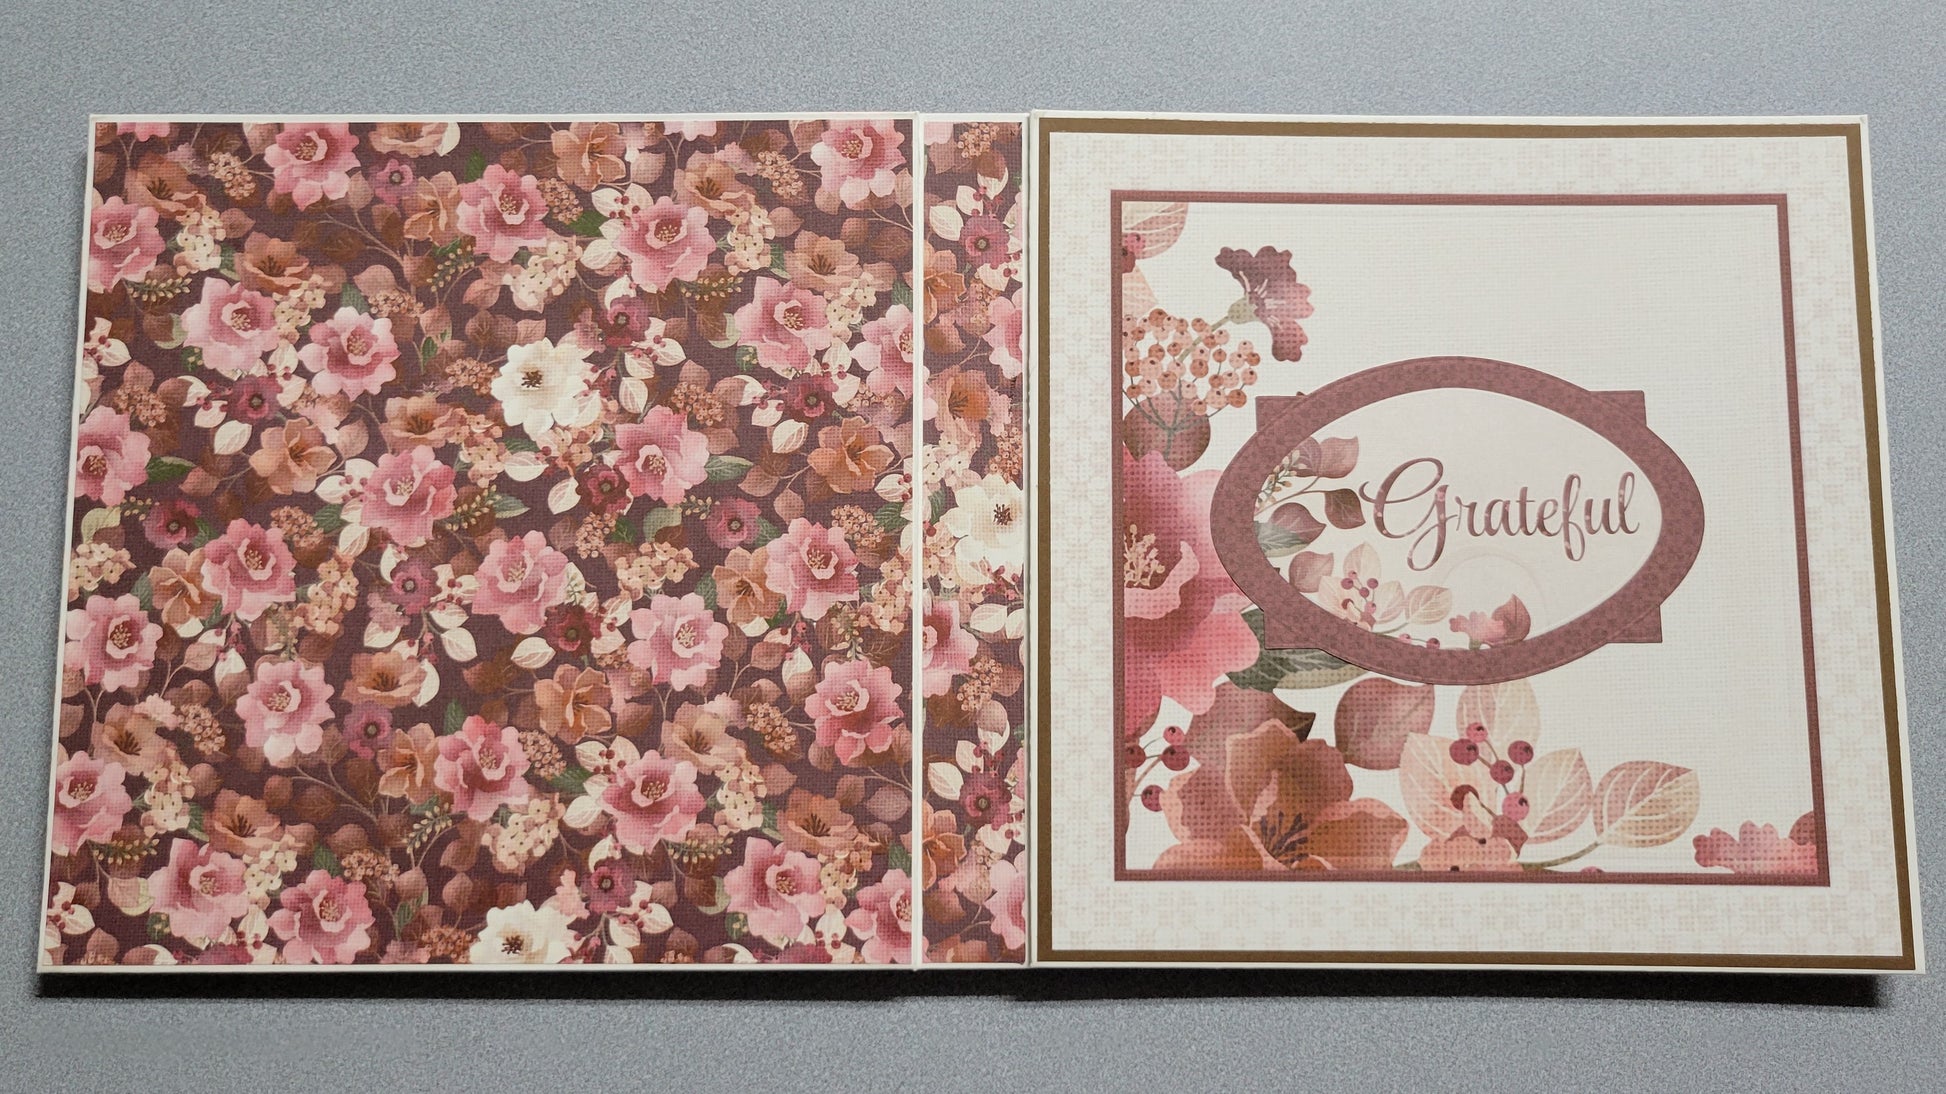 Grateful Photo Album back and front covers.